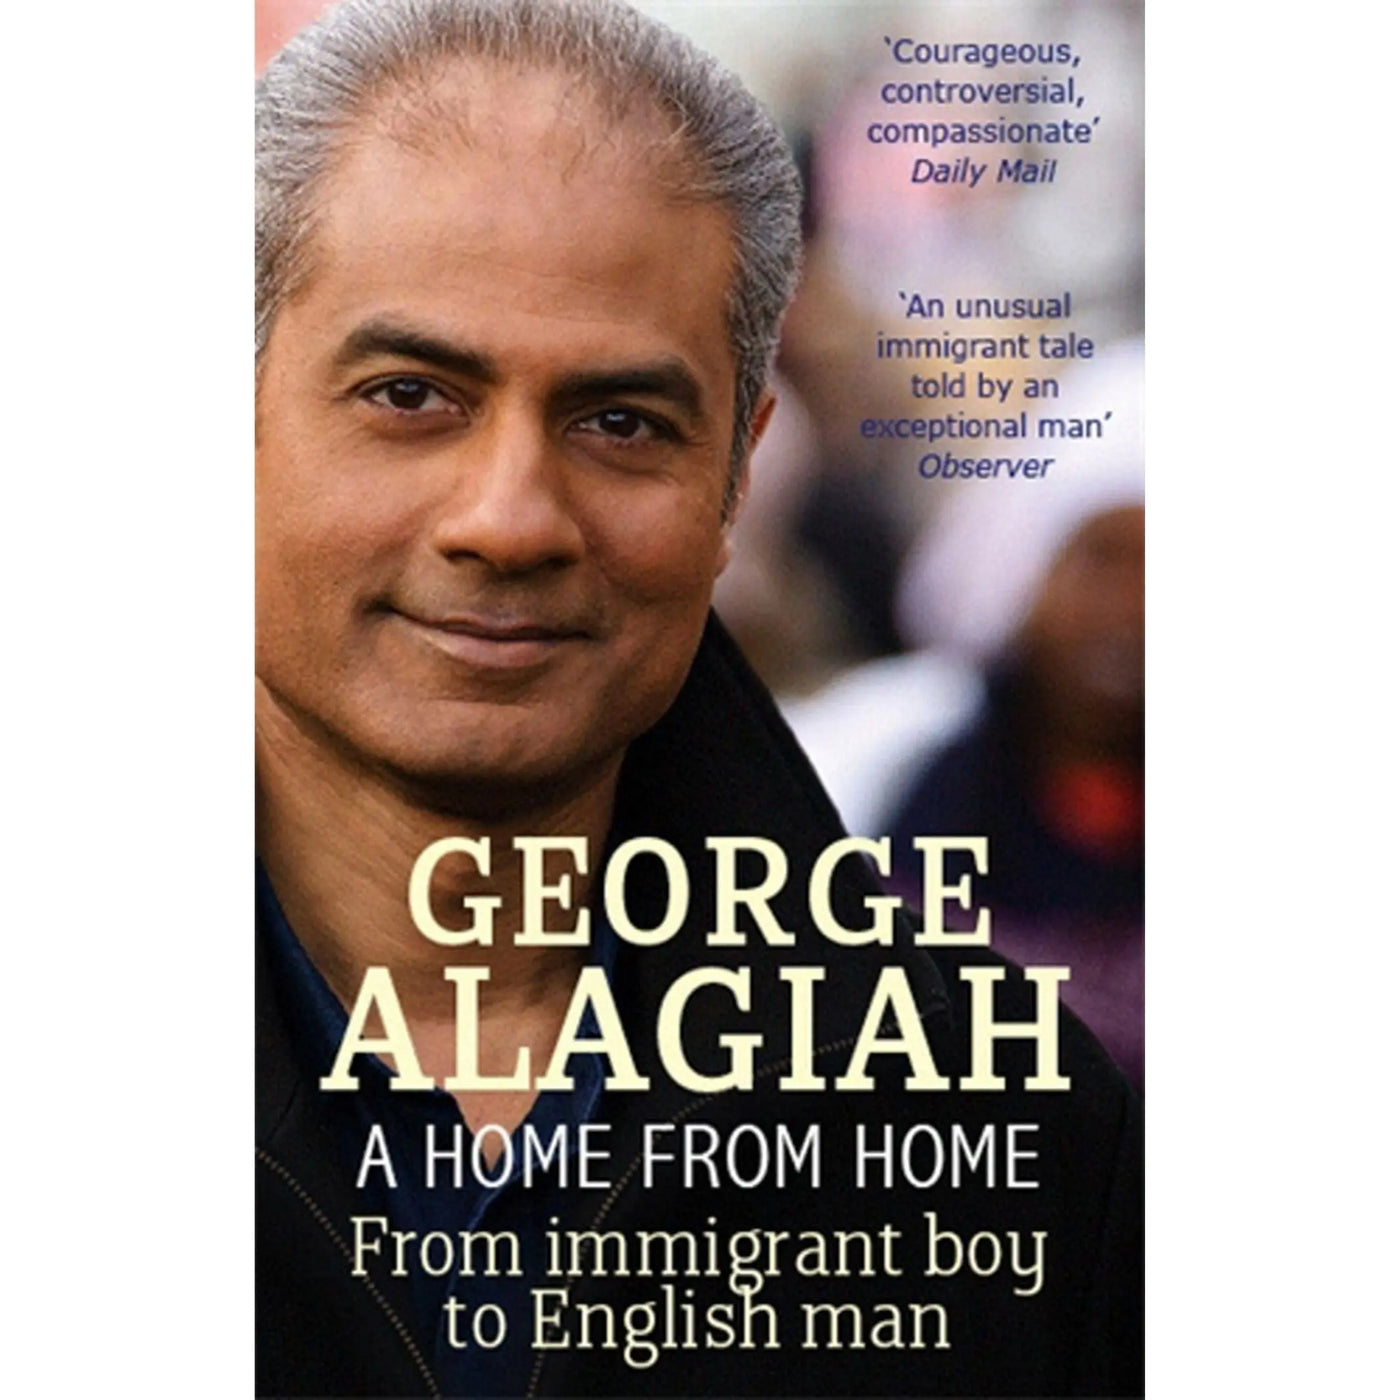 George Alagiah: A Home From Home: From Immigrant Boy to English Man - Migration Museum Shop